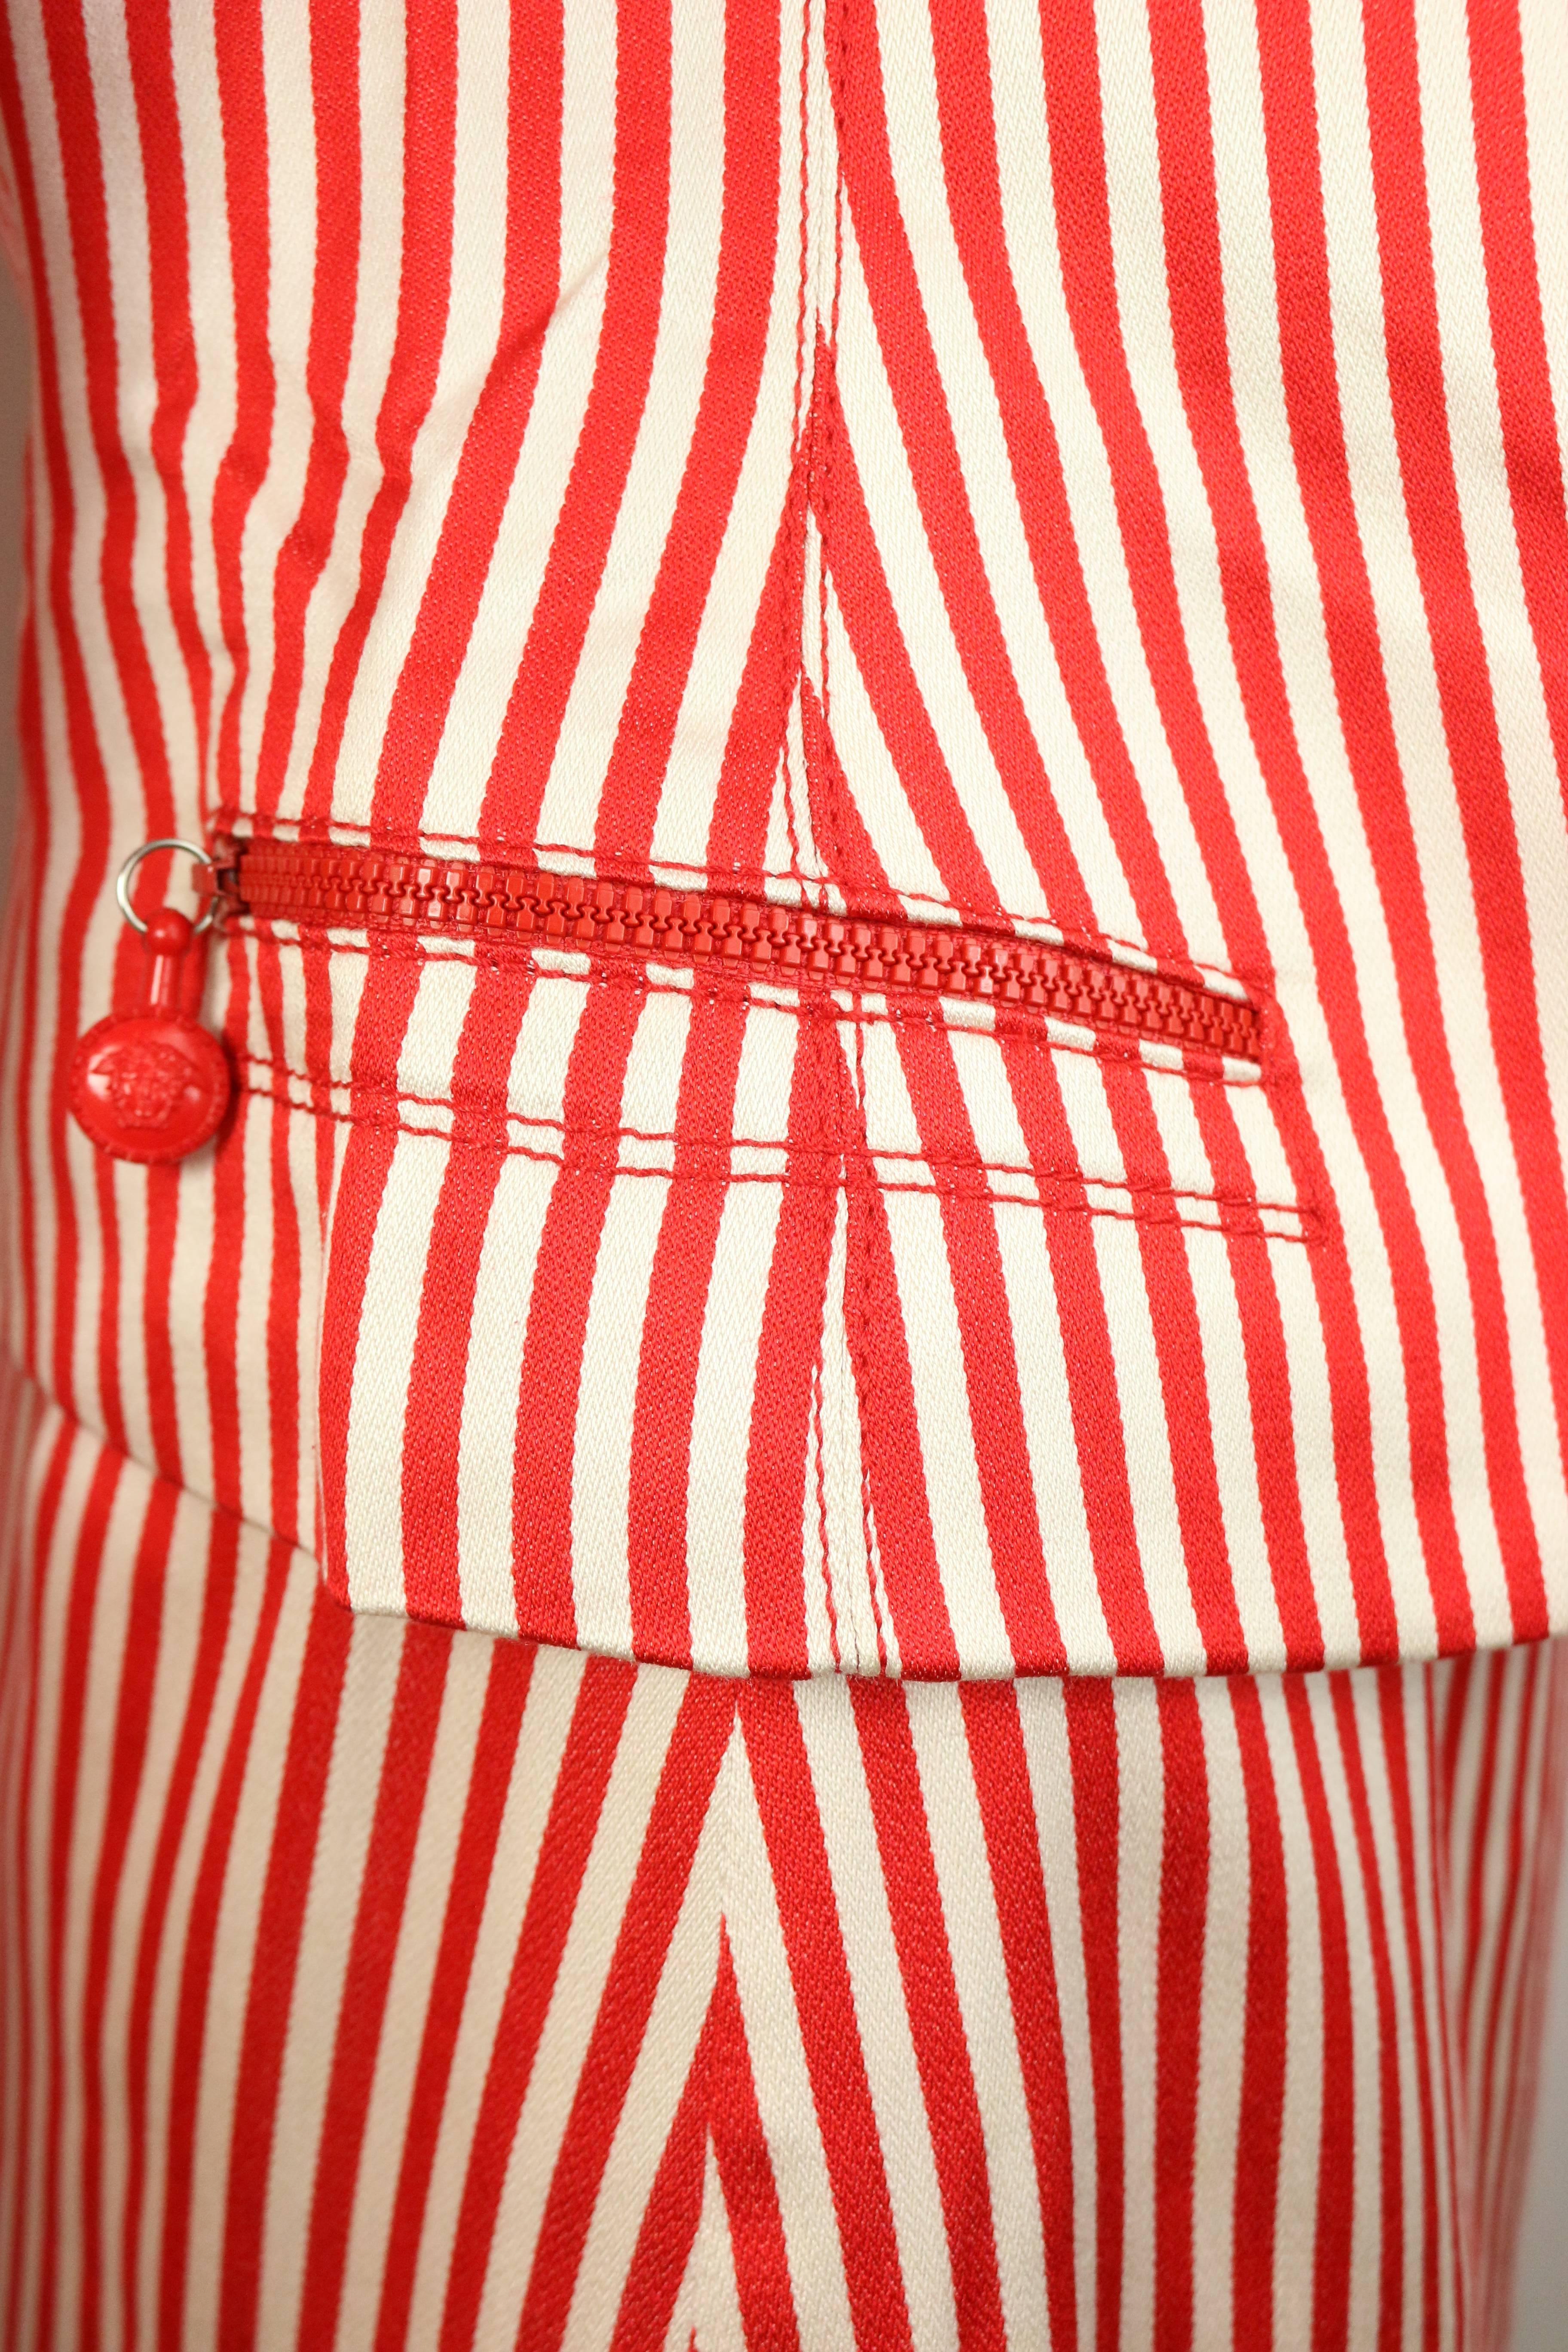 red and white striped suit